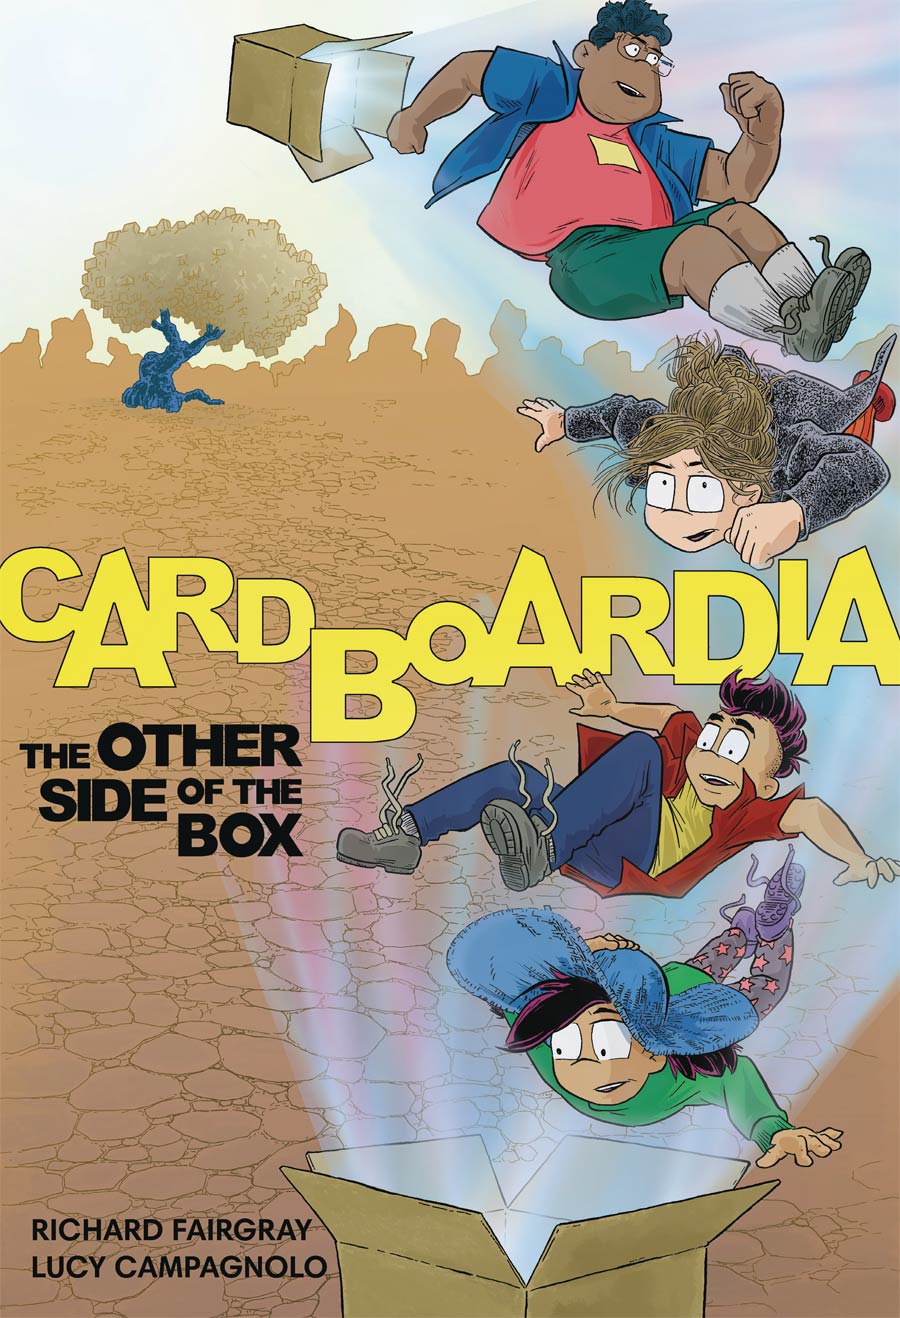 Cardboardia Vol 1 The Other Side Of The Box TP